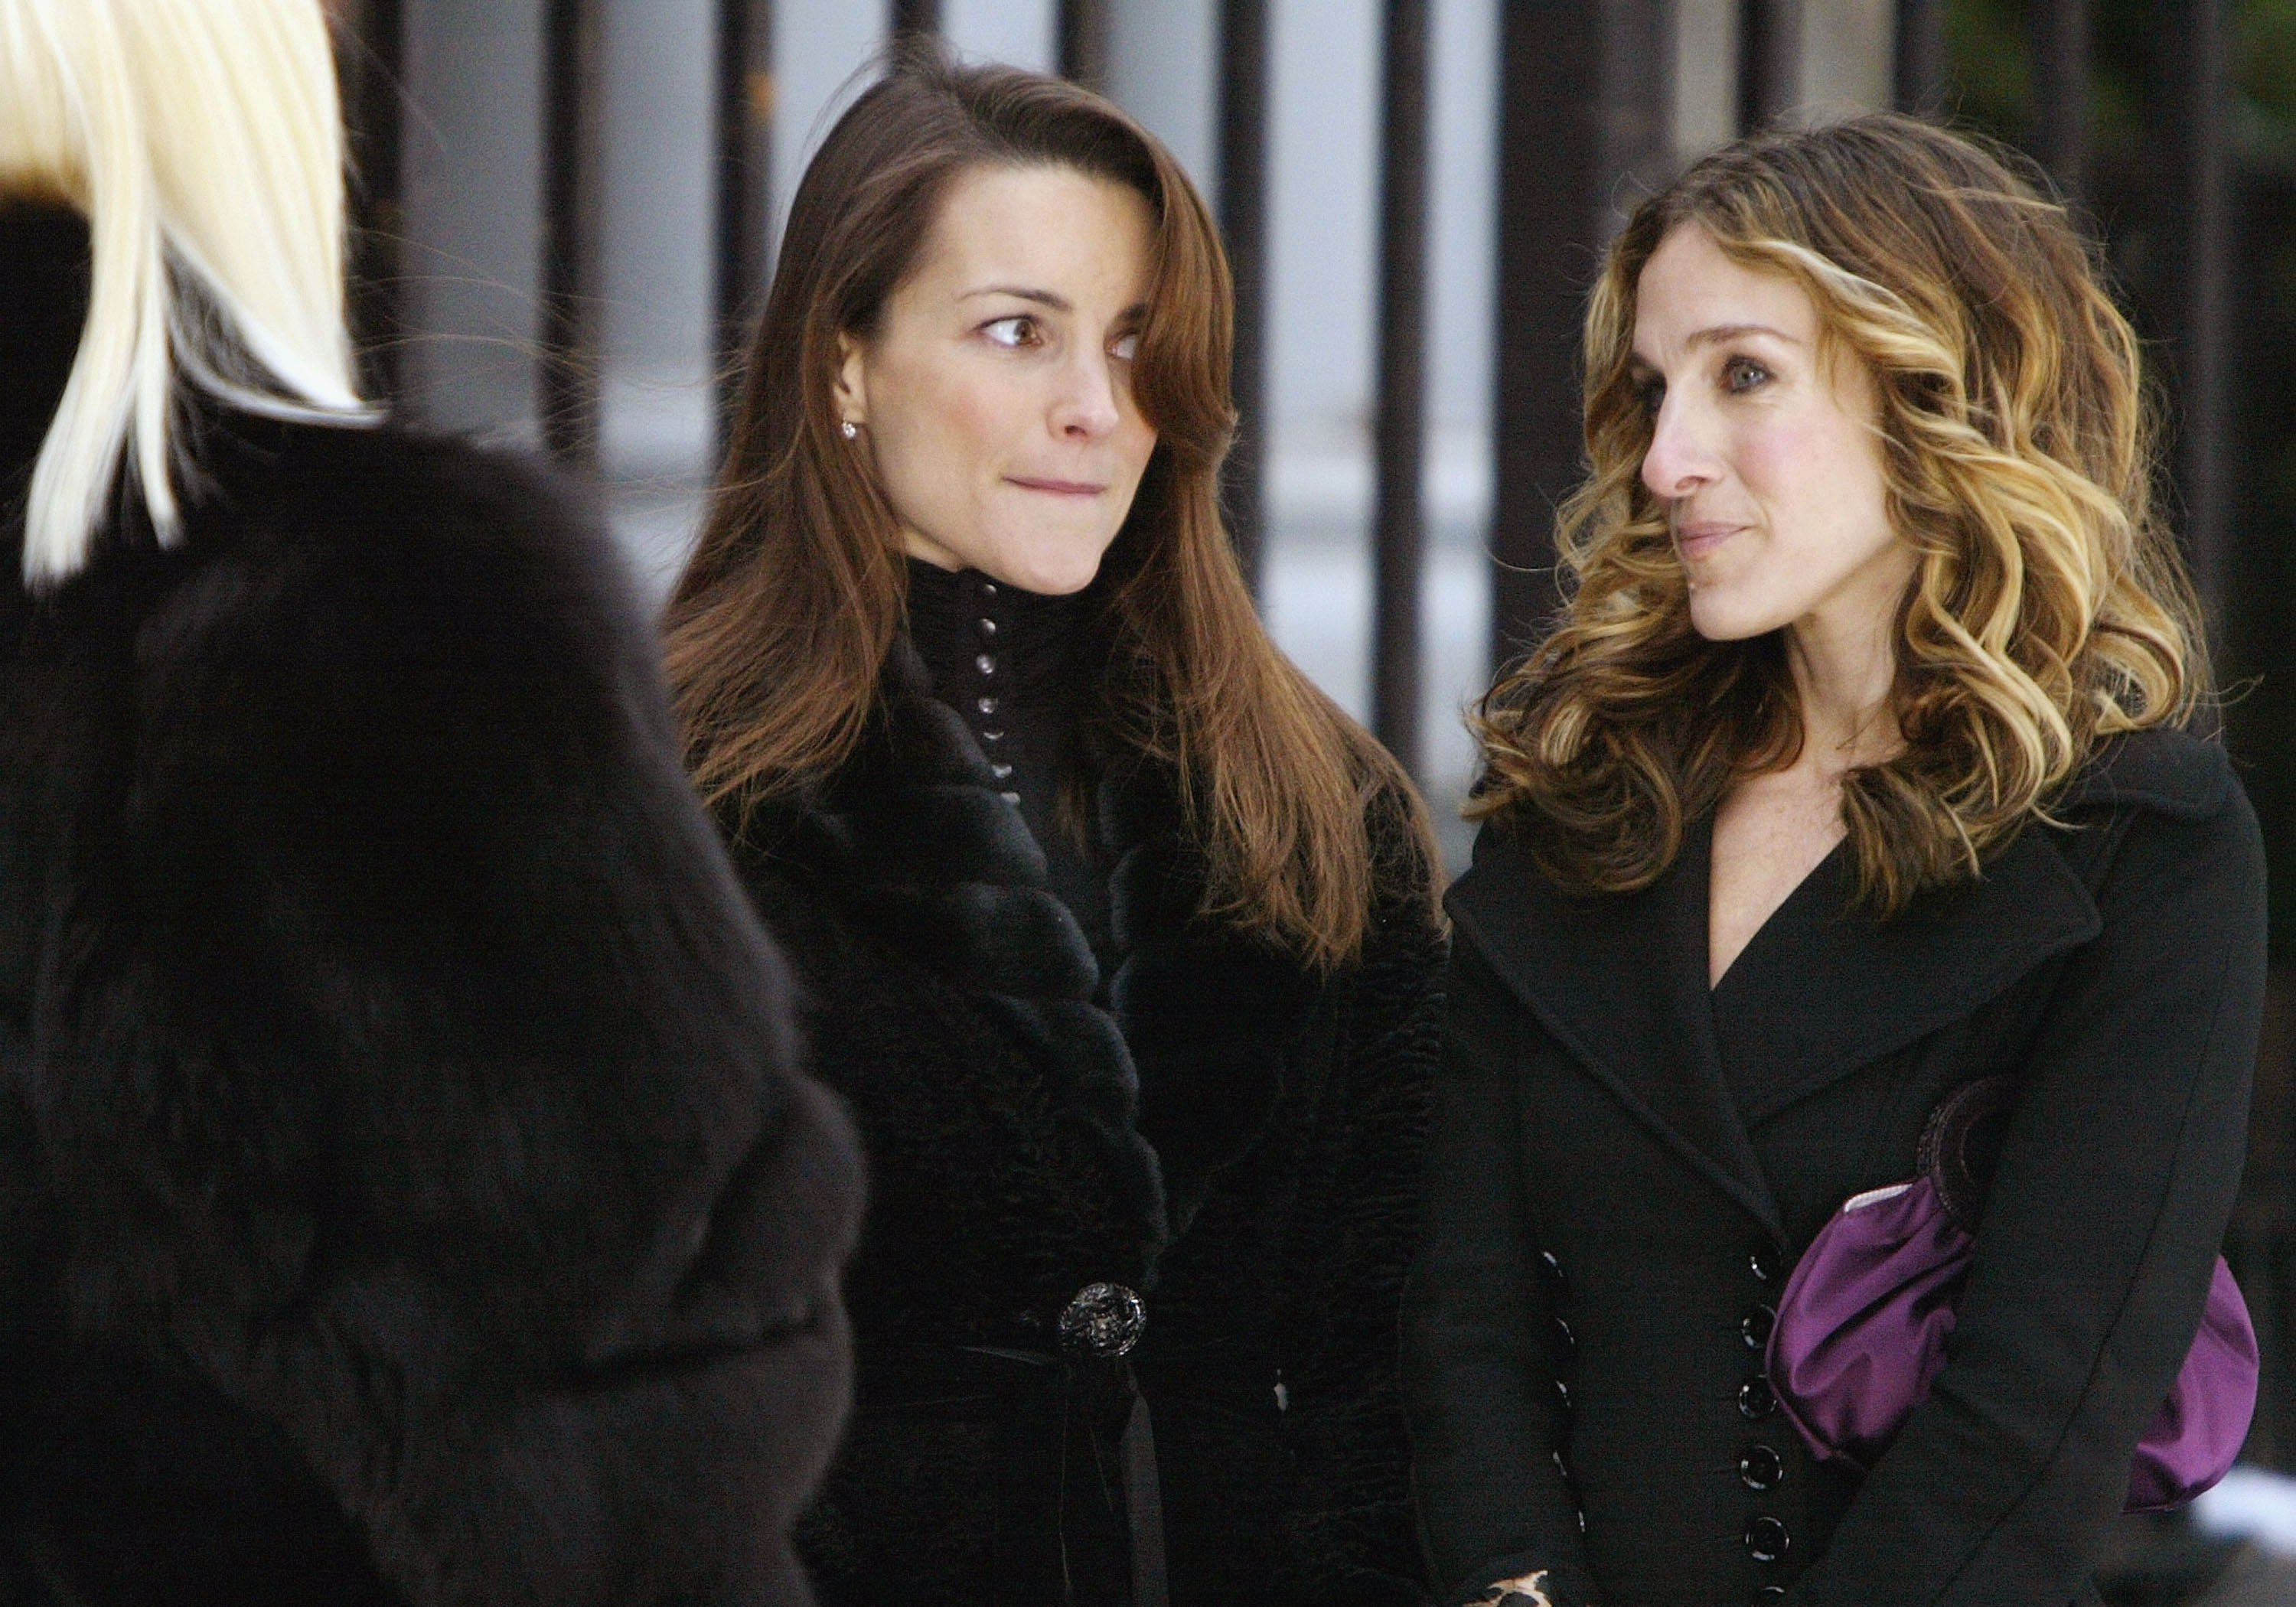 Kristin Davis and Sarah Jessica Parker wearing black coats while filming “Sex And The City” in New York.